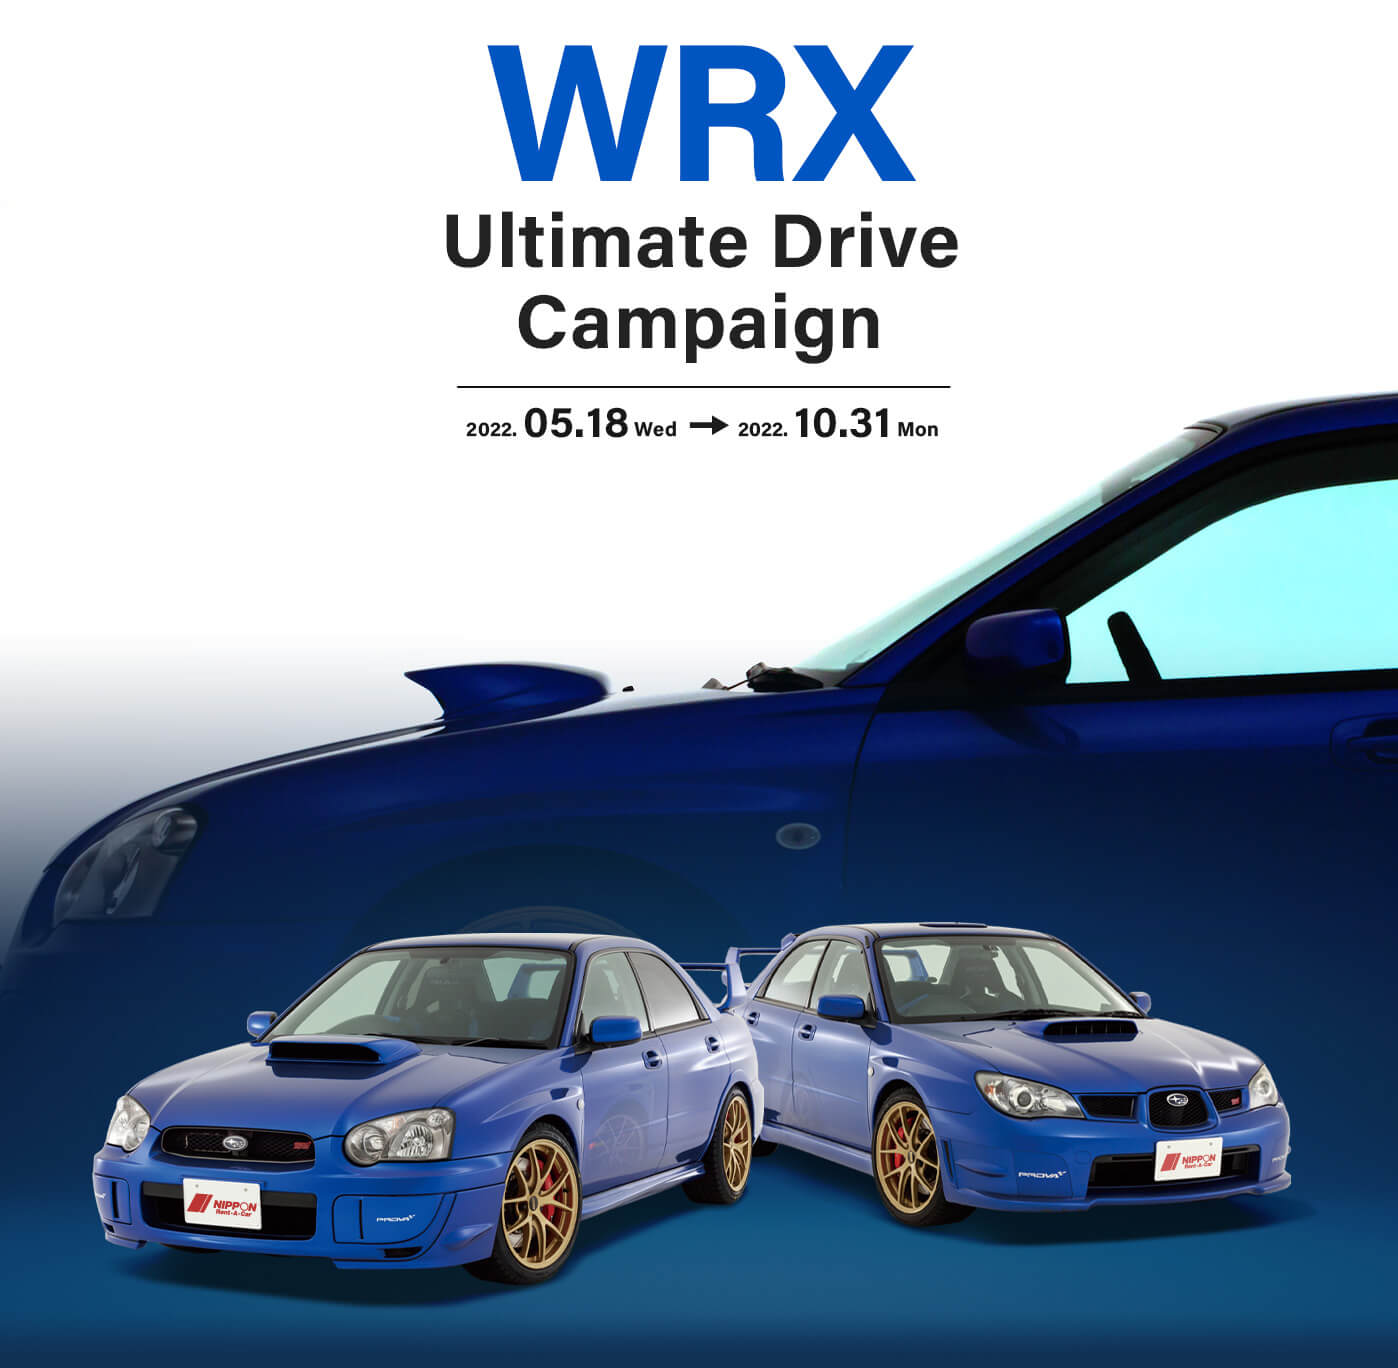 WRX Ultimate Drive Campaign 2022.05.18 Wed → 2022.10.31 Mon